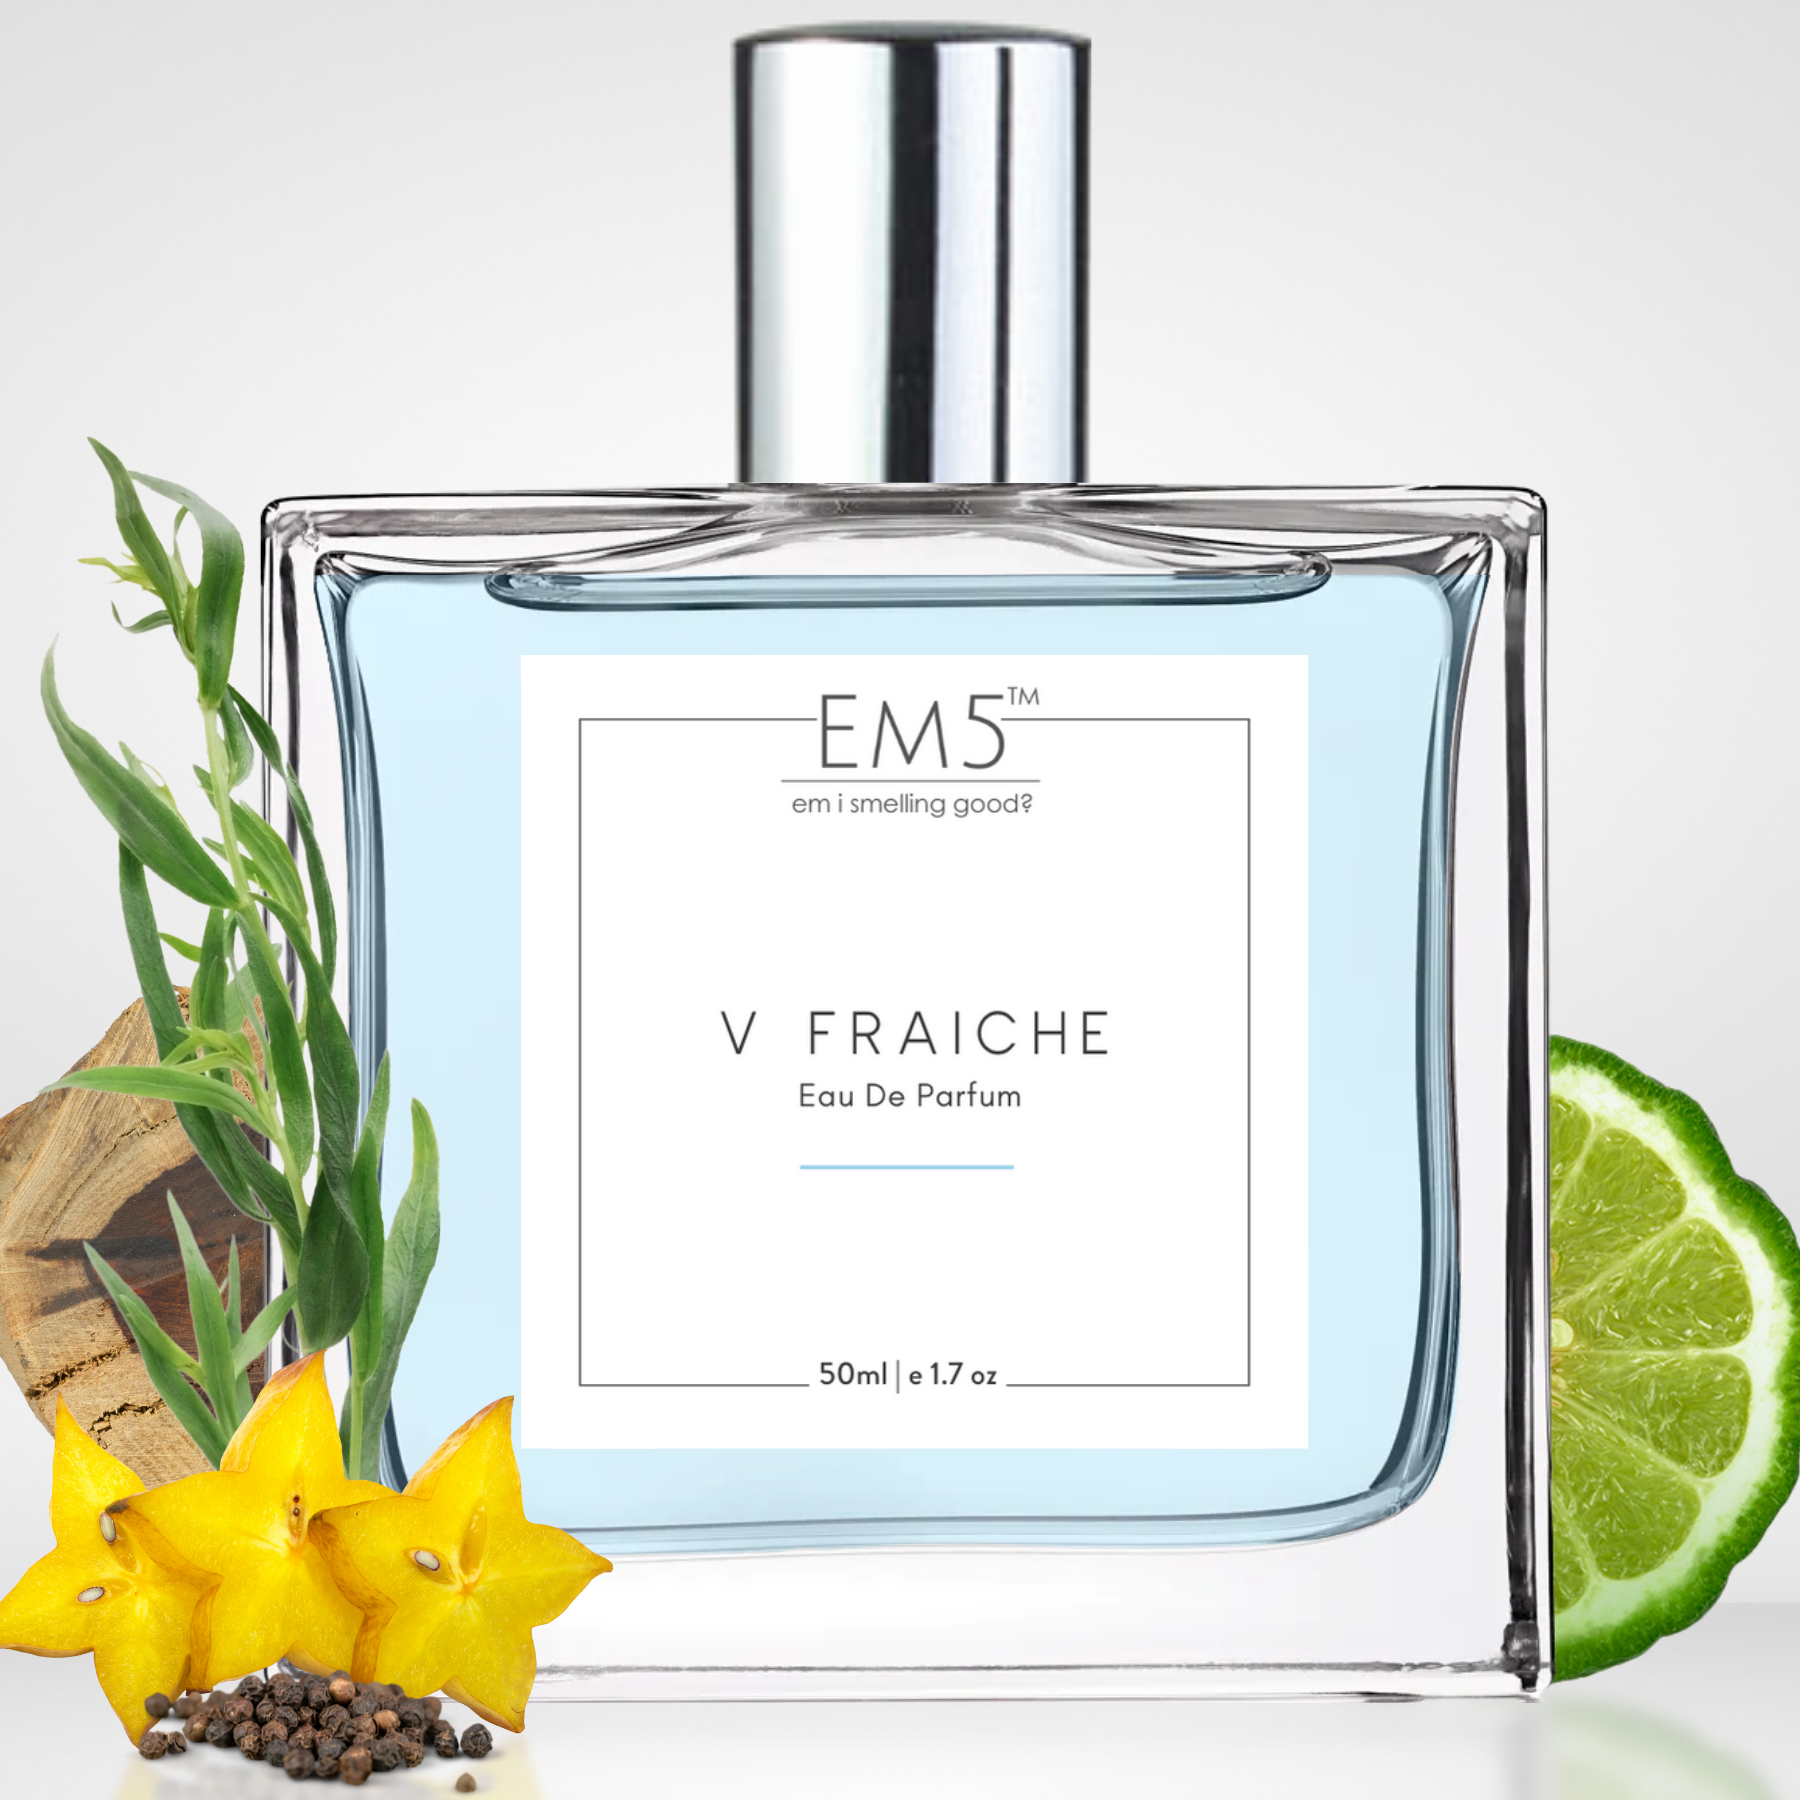 Experience The Magic Of Fragrances At House of EM5